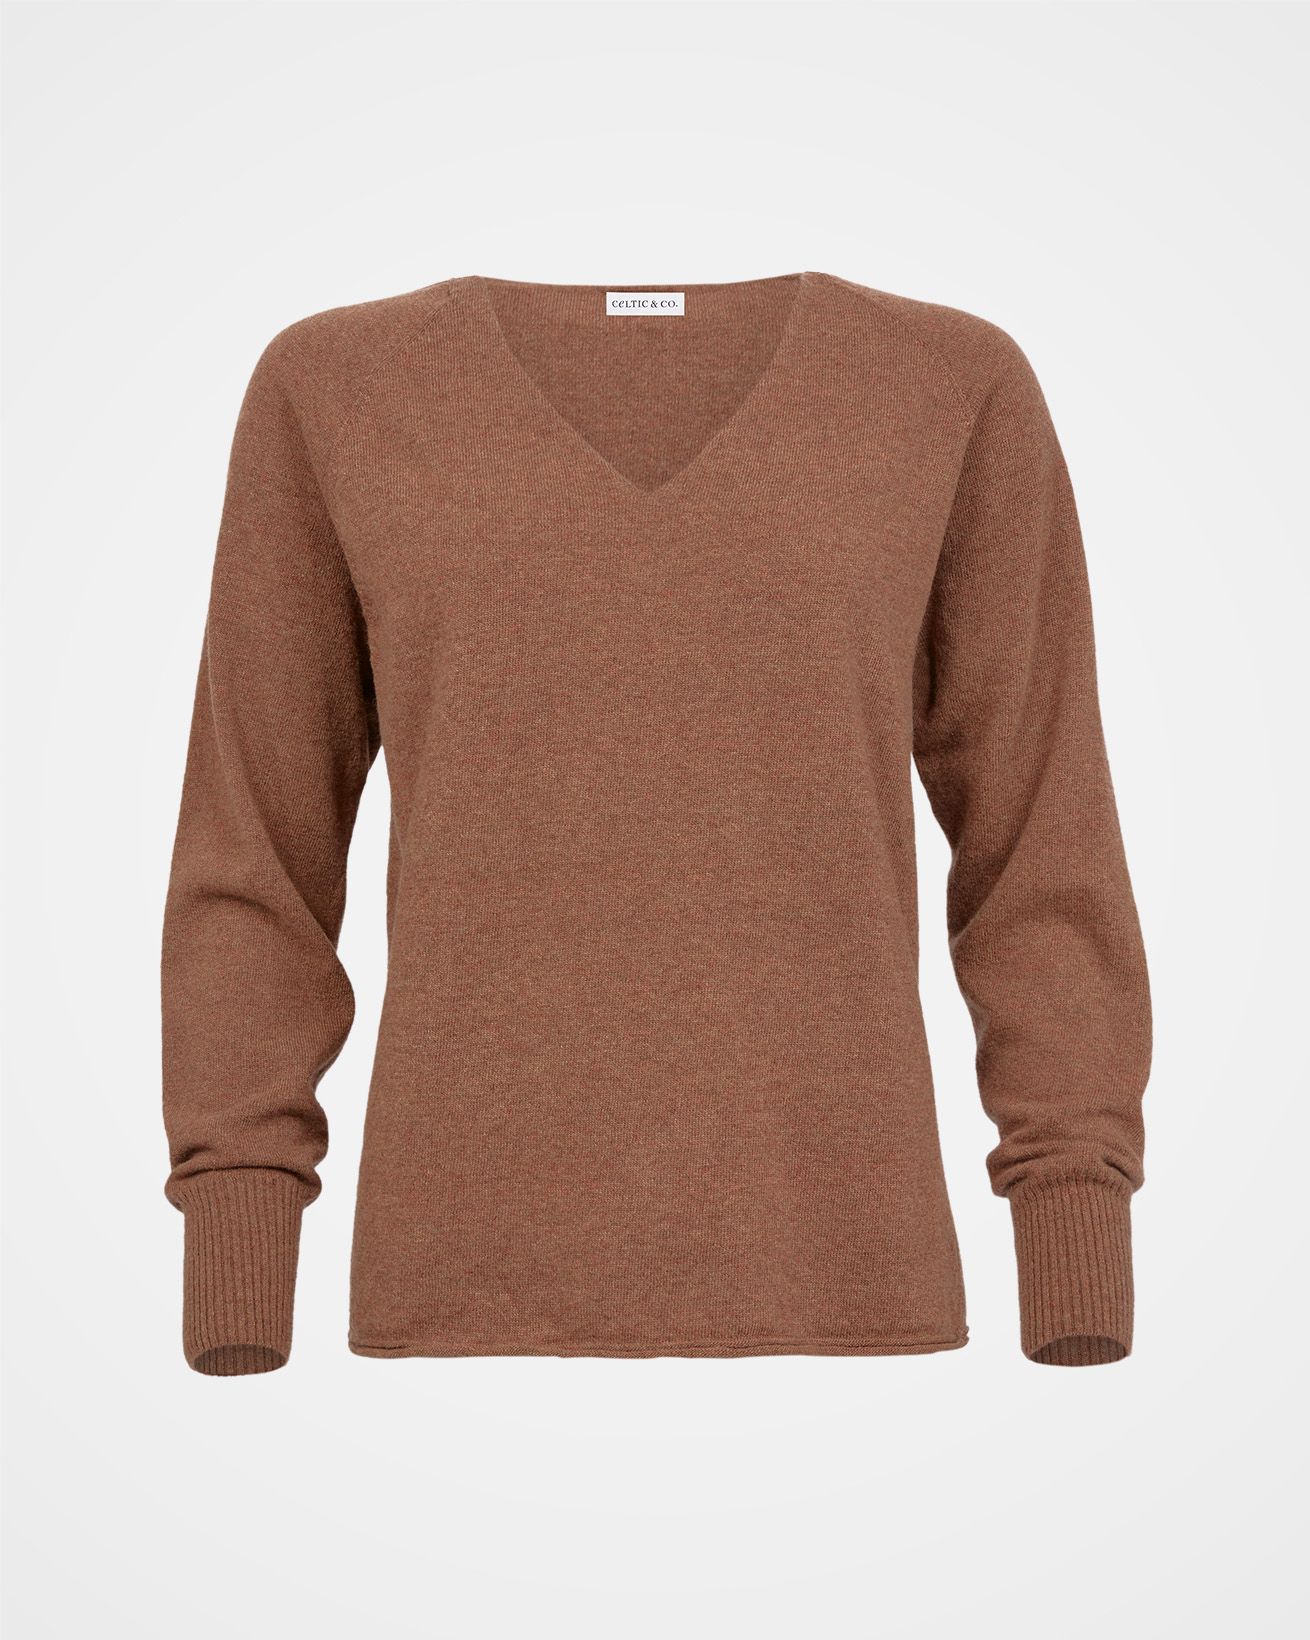 Geelong Slouch V neck / Rust / M